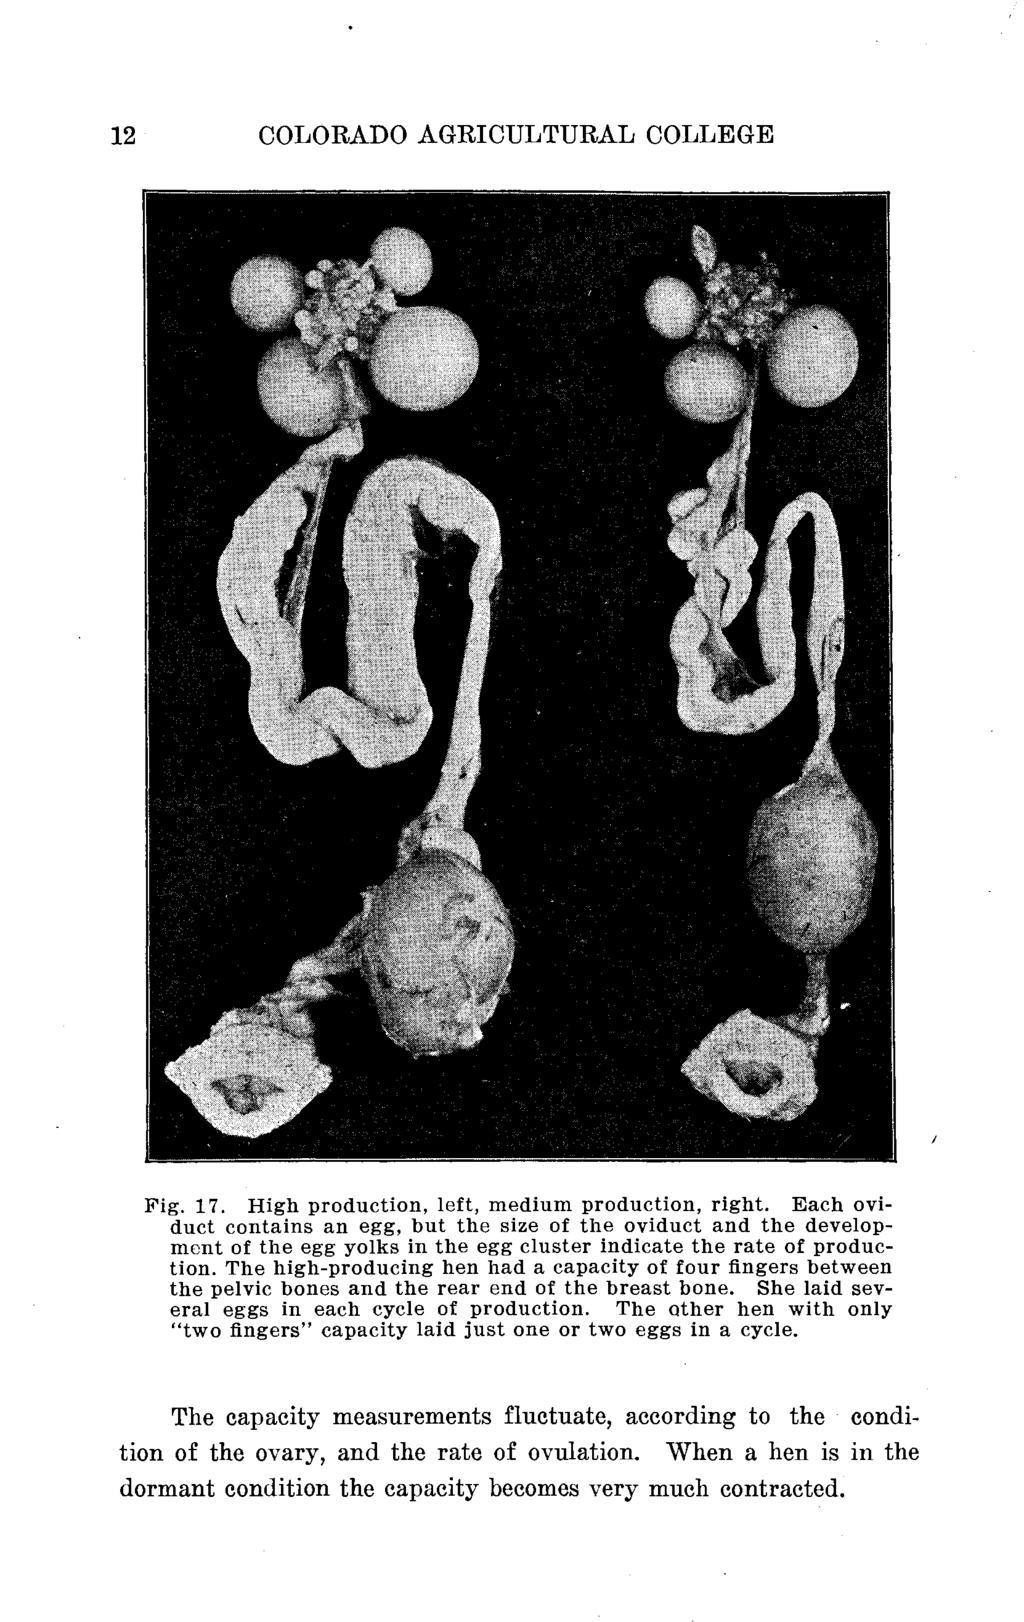 12 COLORADO AGRICULTURAL COLLEGE Fig. 17. High production, left, medium production, right.